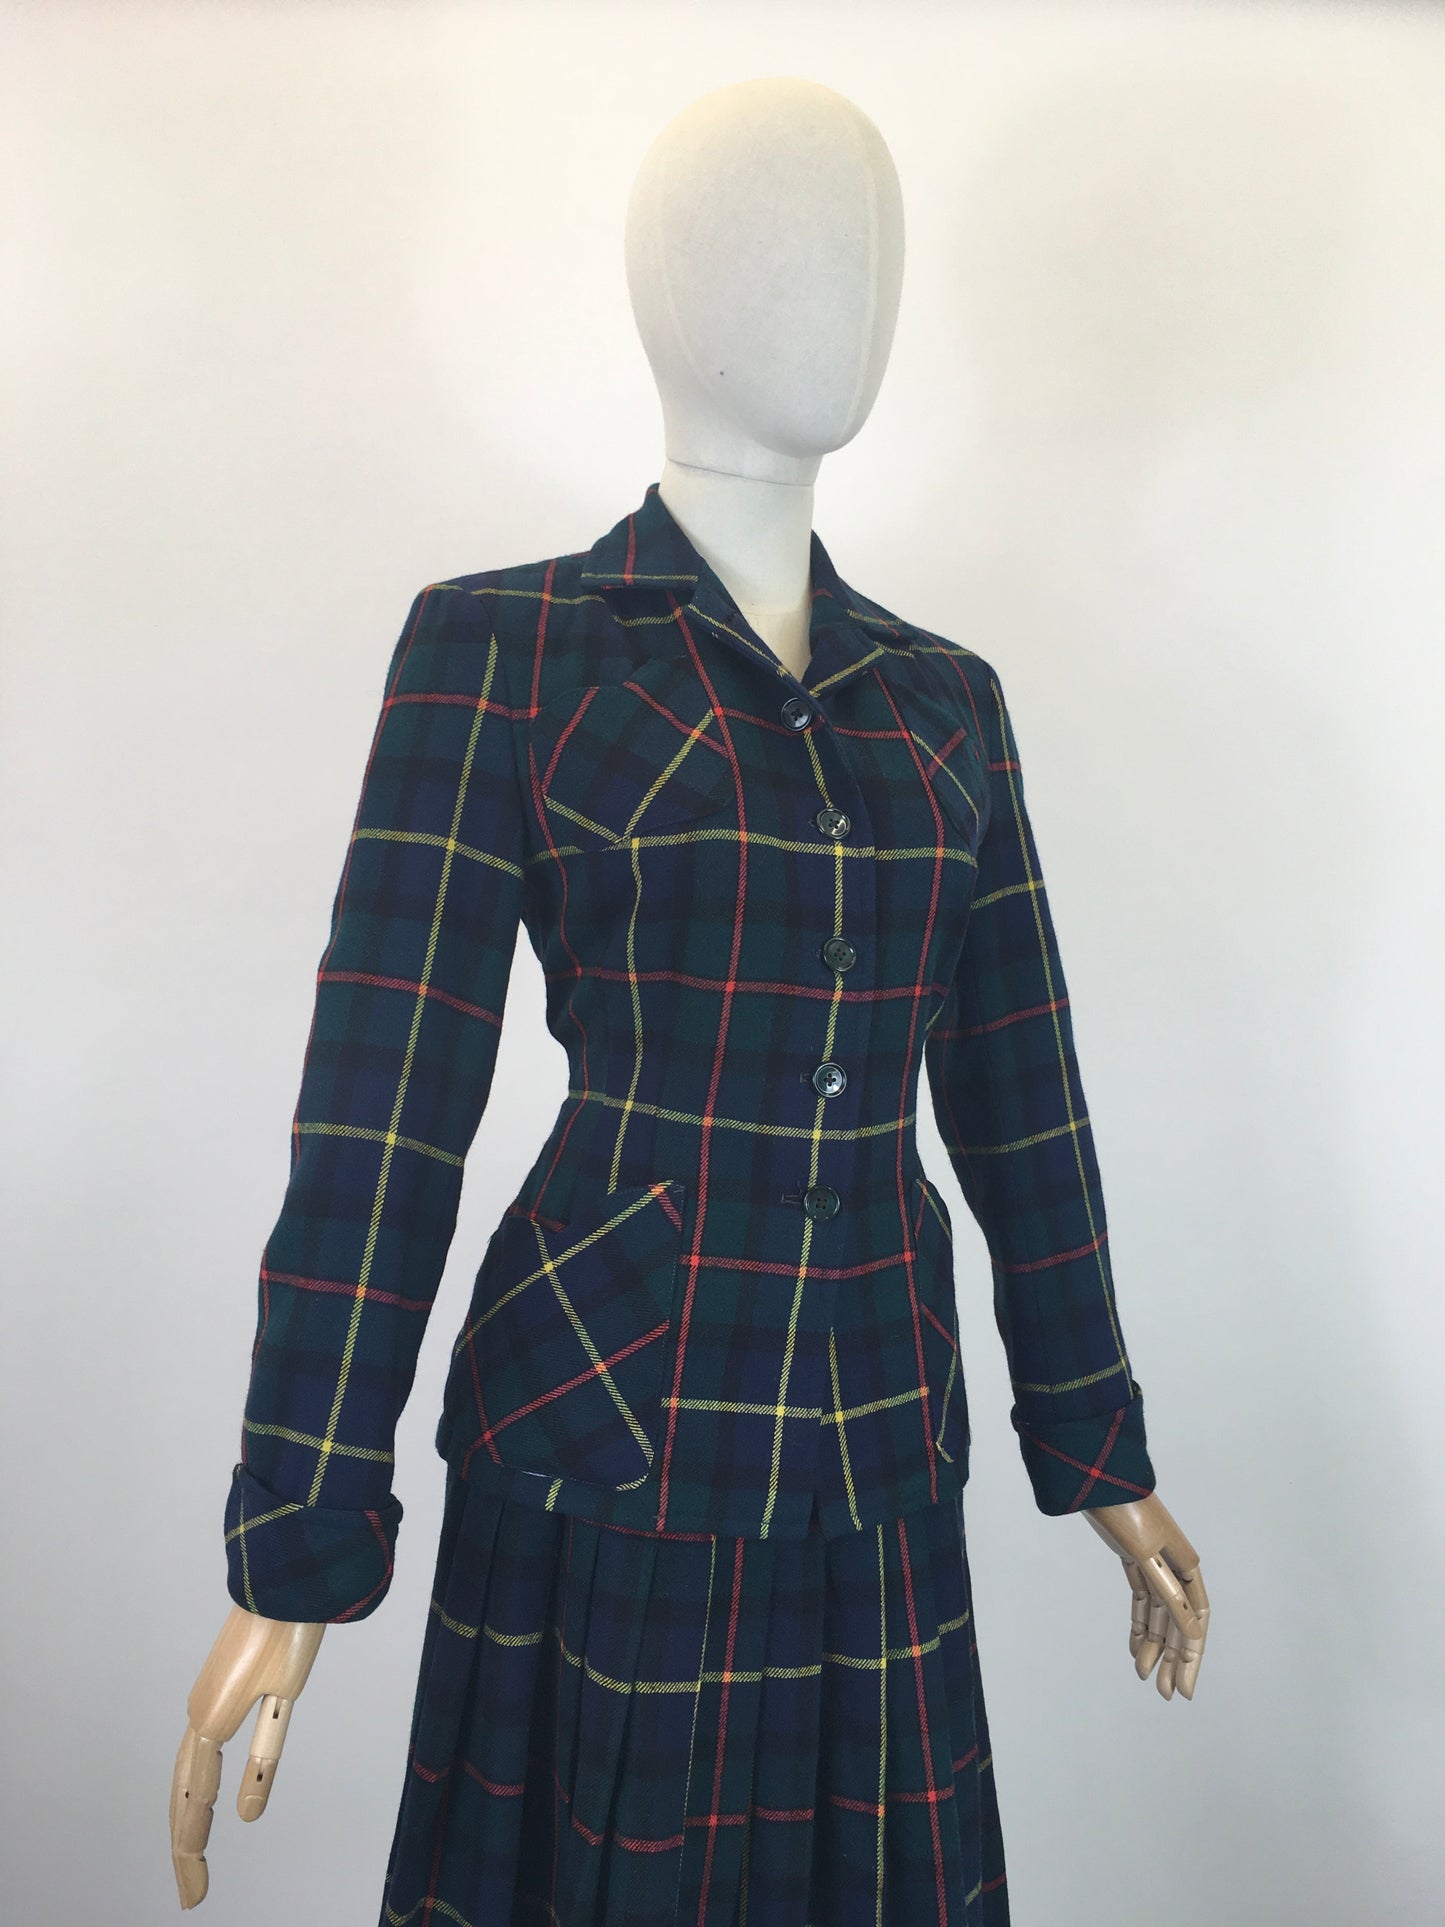 Original 1940's Stunning 2pc Suit - In A Fabulous Wool Plaid in Red, Yellow, Green & Navy